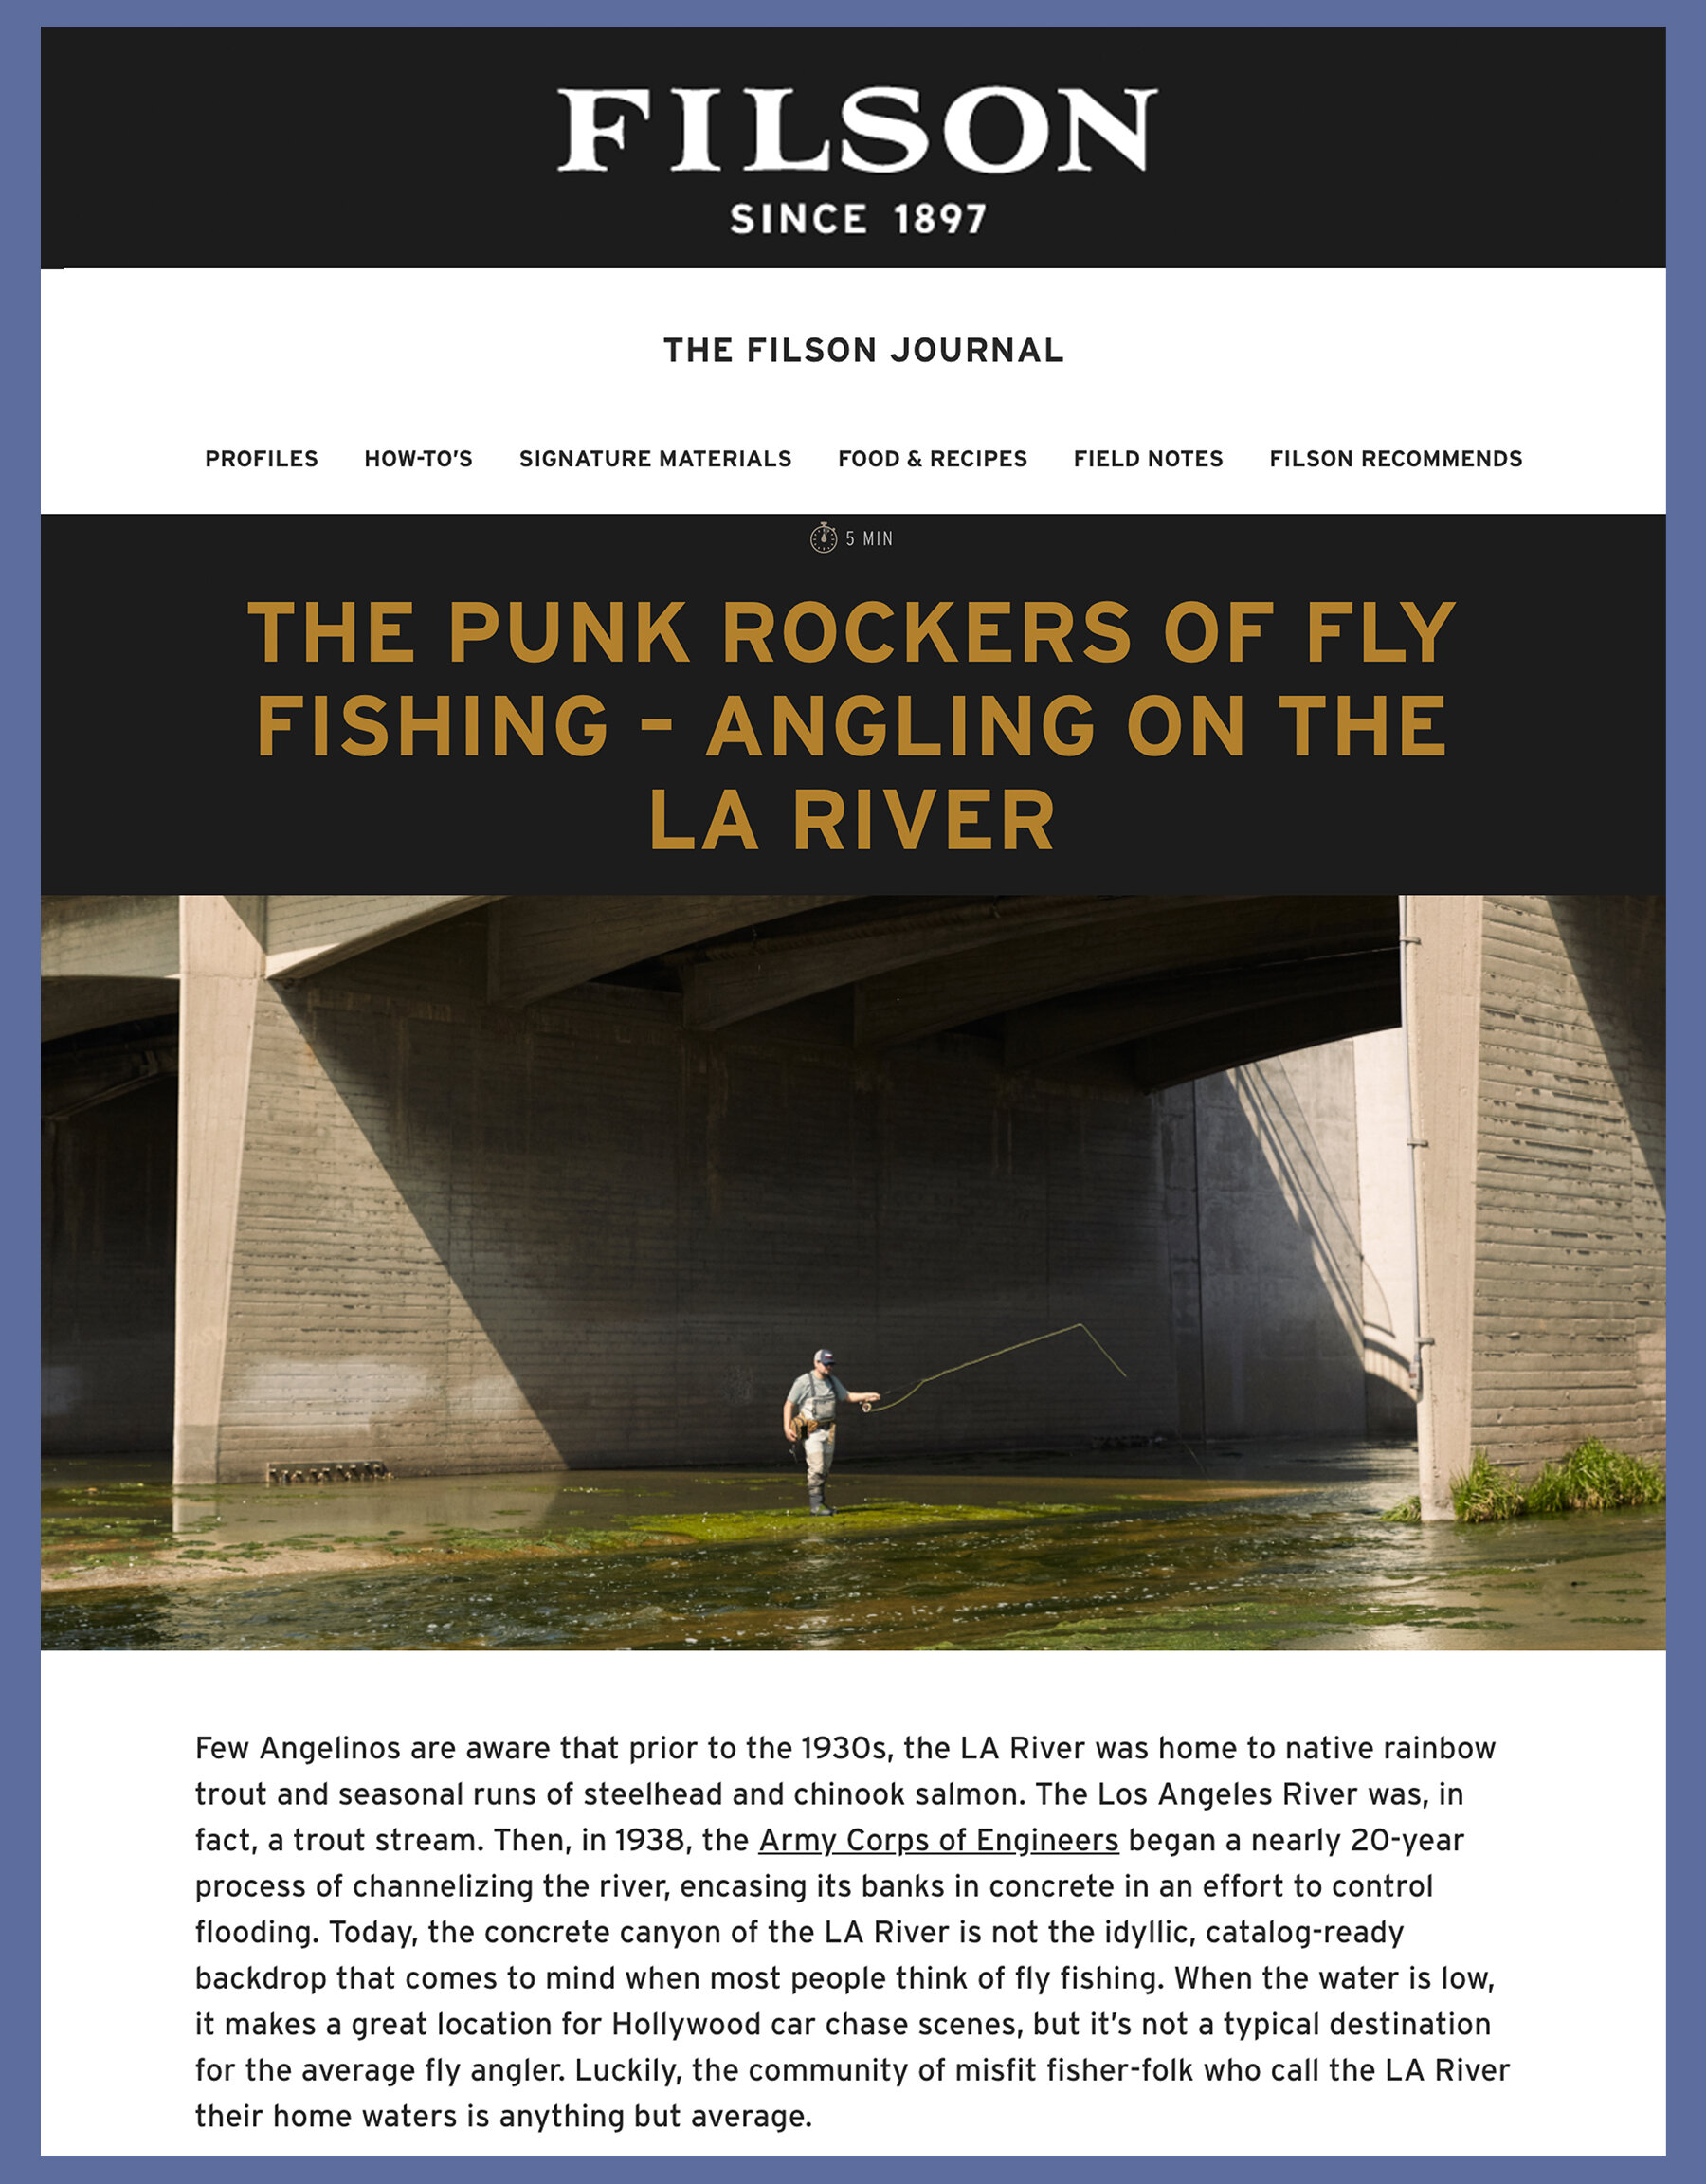 The punk rockers of fly fishing – angling on the LA River